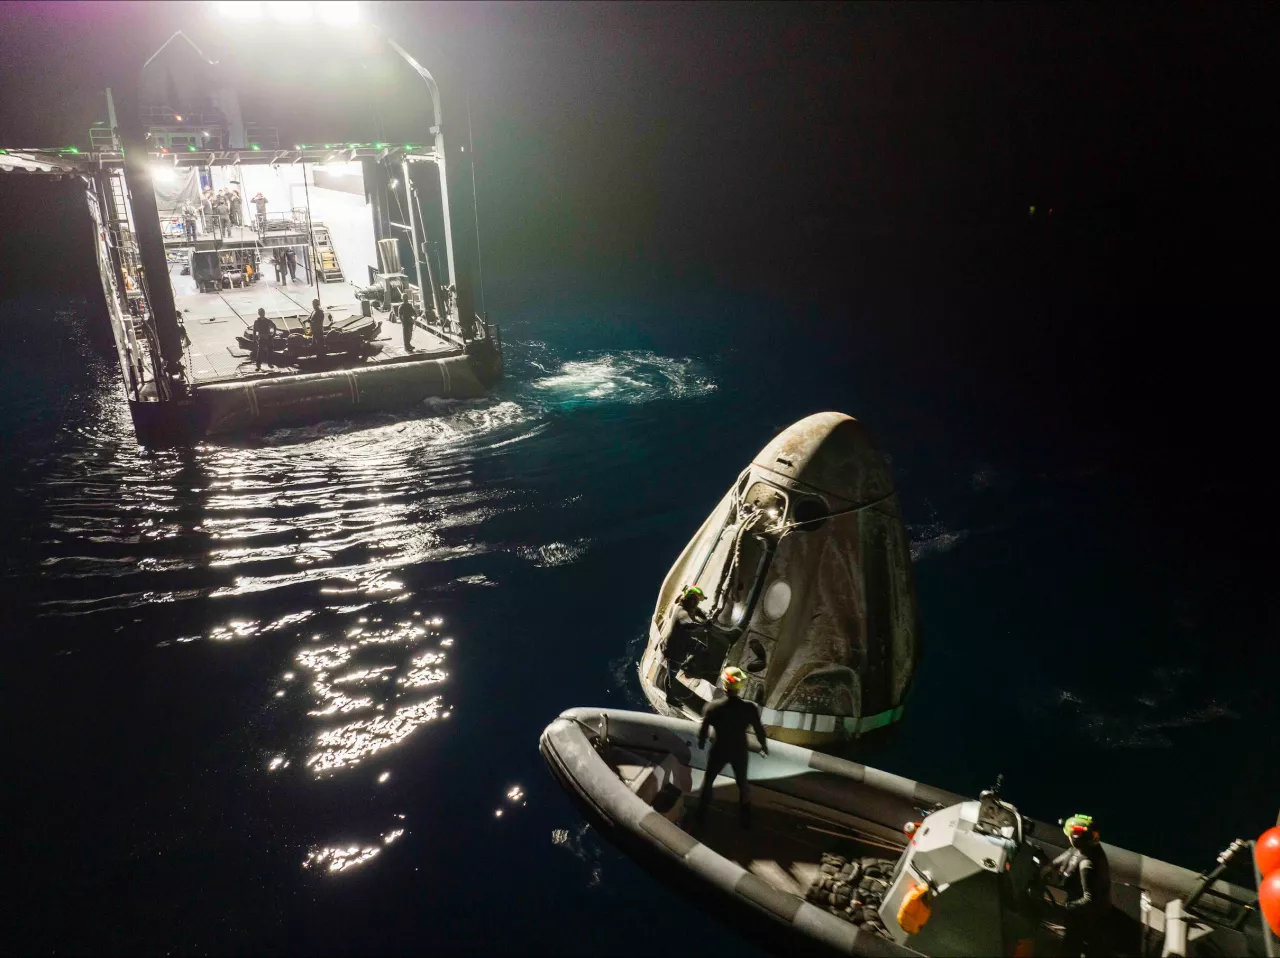 A successful AX-2 splashdown, mission and safe landing of the astronauts following a pioneering scientific trip to the International Space Station. img#3